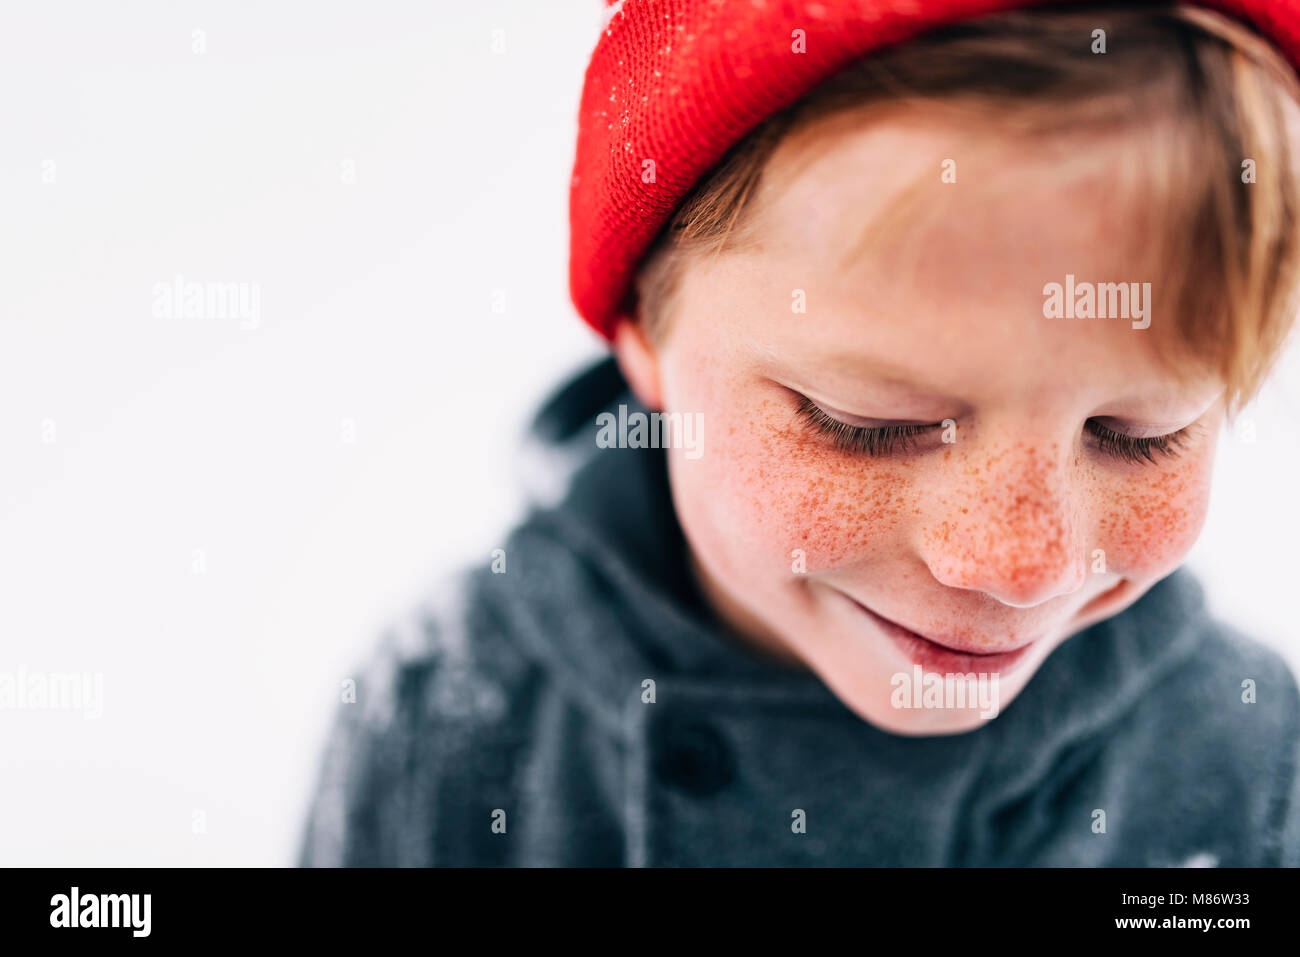 Portrait of a smiling boy with freckles Stock Photo